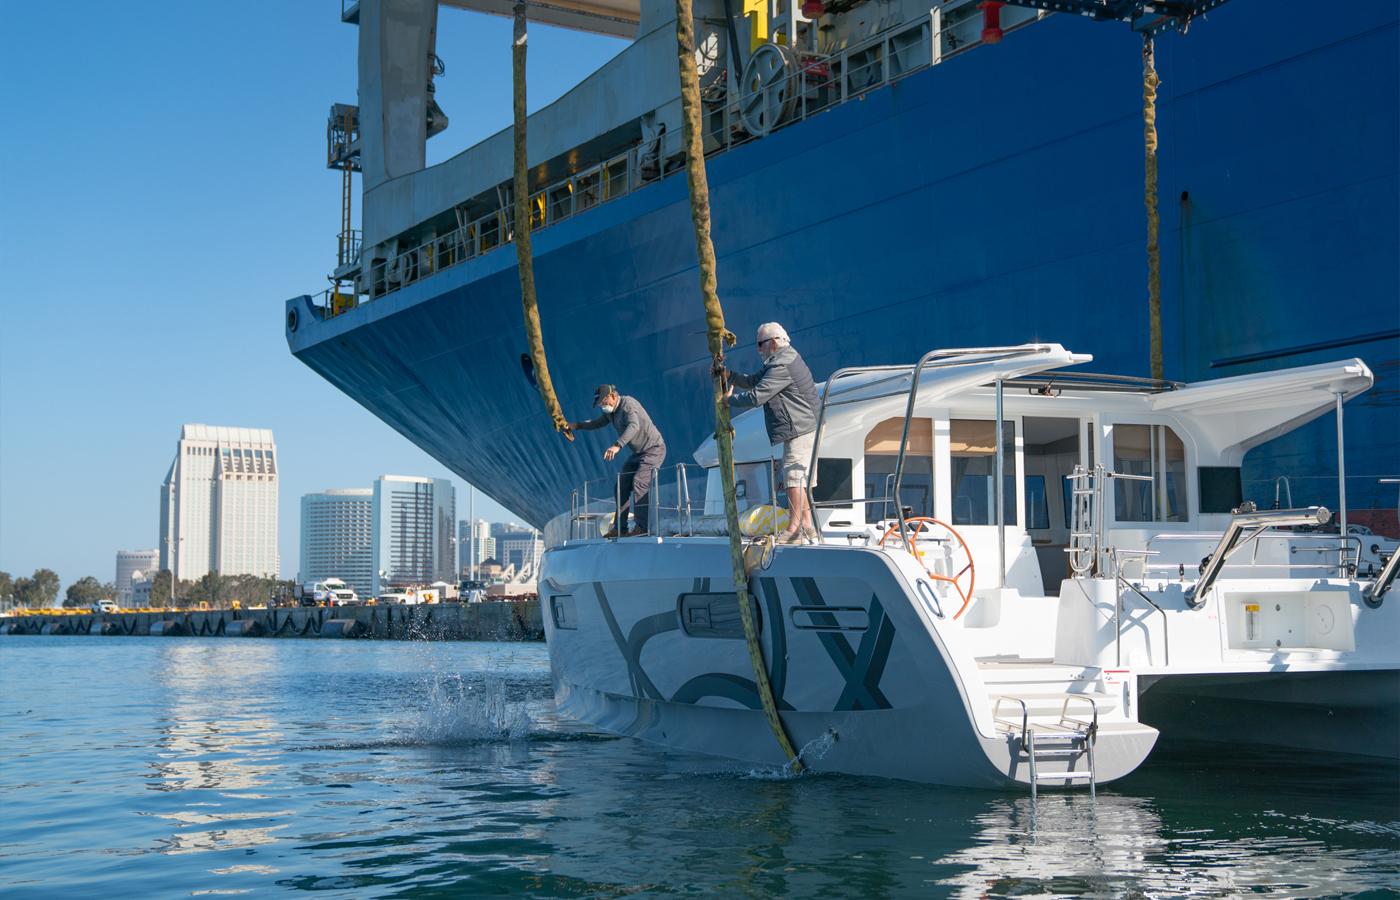 Excess Catamaran Delivered To San Diego [New XCS12 For Sale]